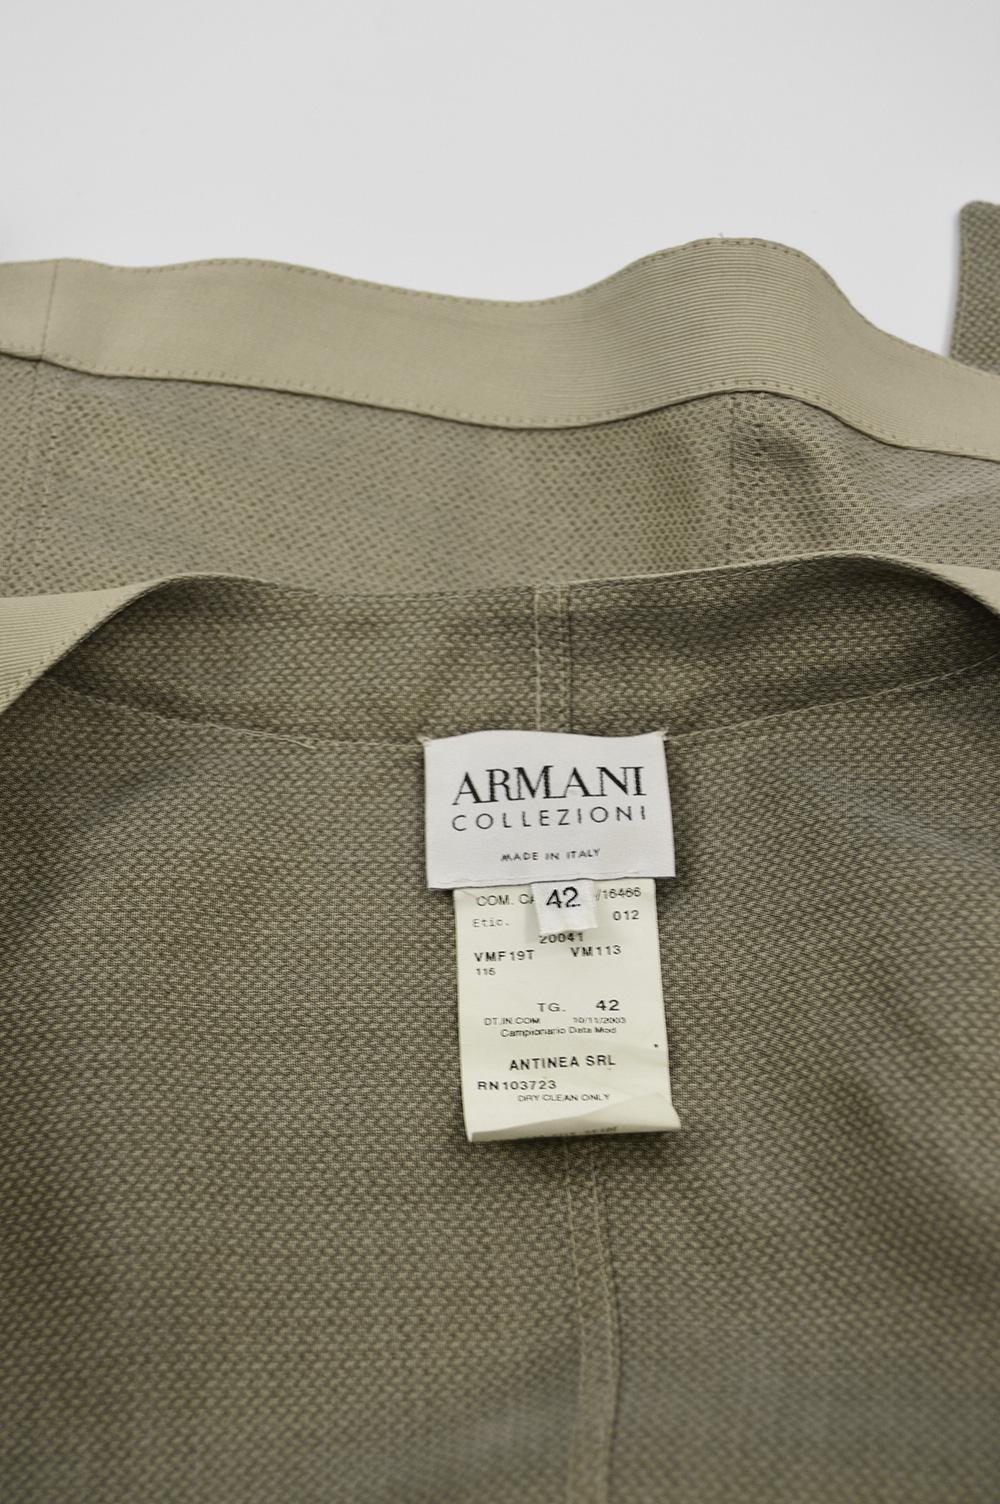 Giorgio Armani Collezioni Silk & Rayon Mesh and Grosgrain Lightweight Jacket In Good Condition In Doncaster, South Yorkshire